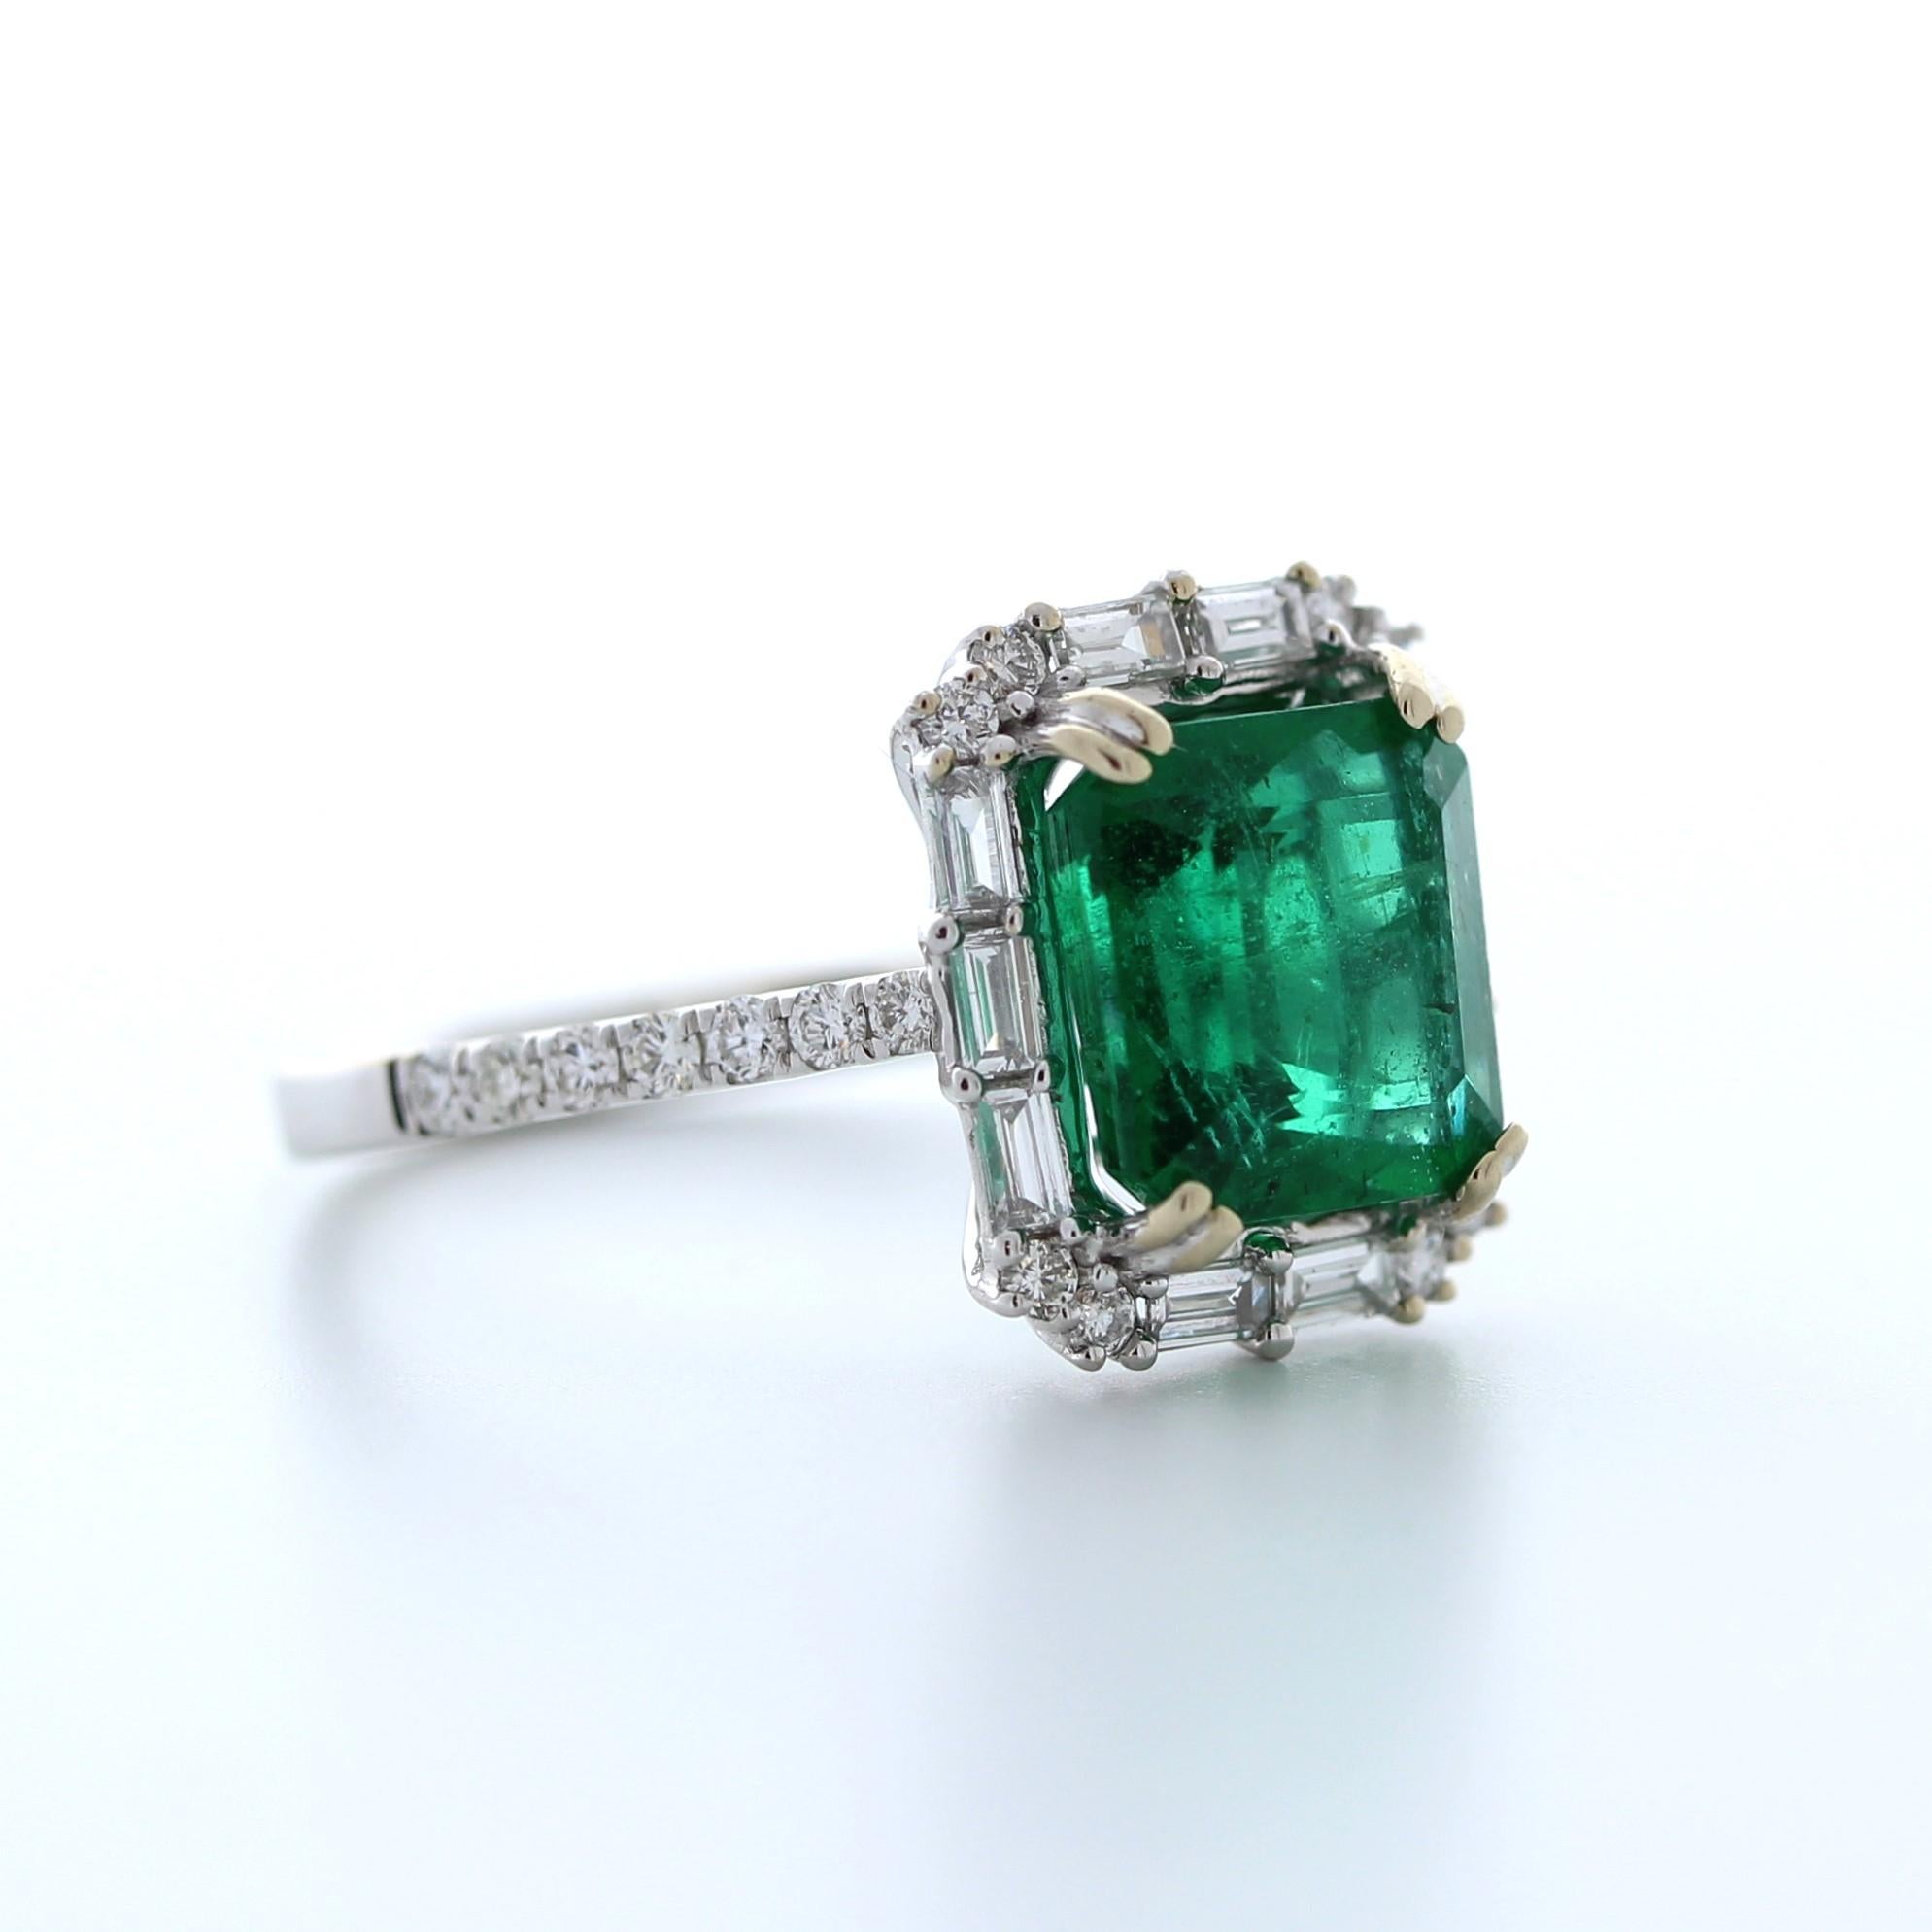 This stunning 3.16 carat weight green emerald fashion ring is a gorgeous and eye-catching choice for any occasion. The emerald is a beautiful shade of green and boasts exceptional clarity and brilliance, weighing in at 3.16 carats. It is set in